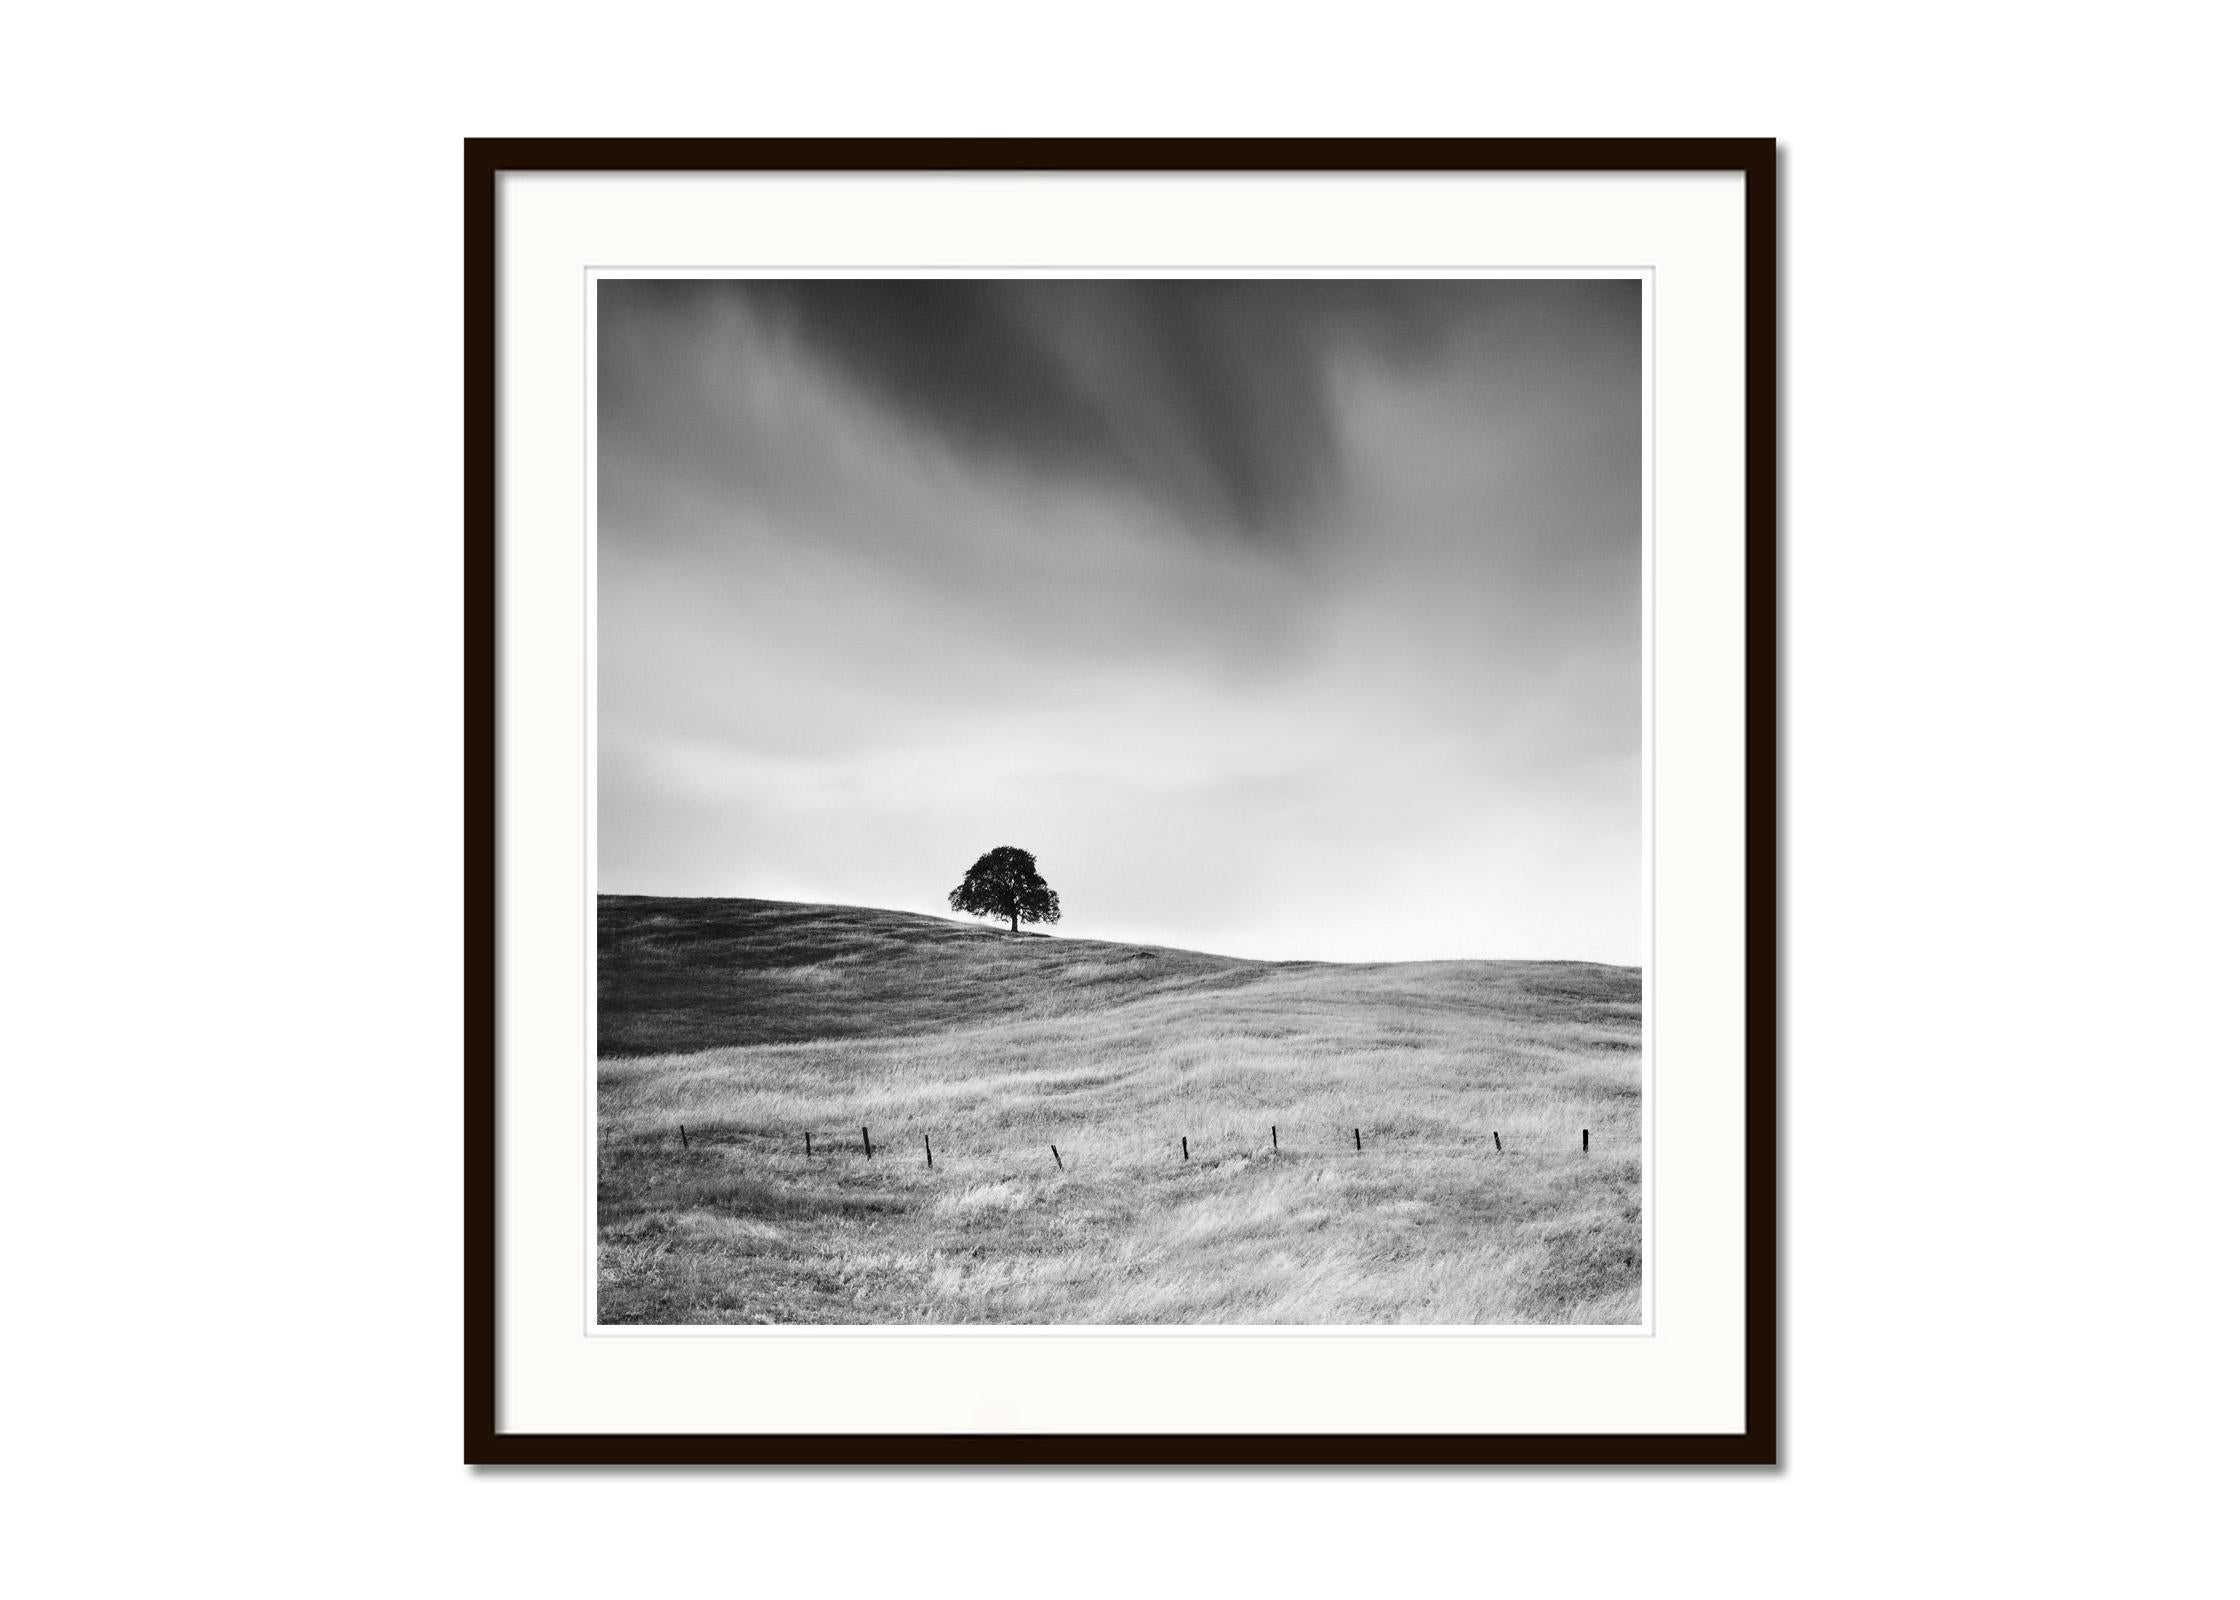 The tree in the golden grass California USA black white art landscape photography - Gris Black and White Photograph par Gerald Berghammer